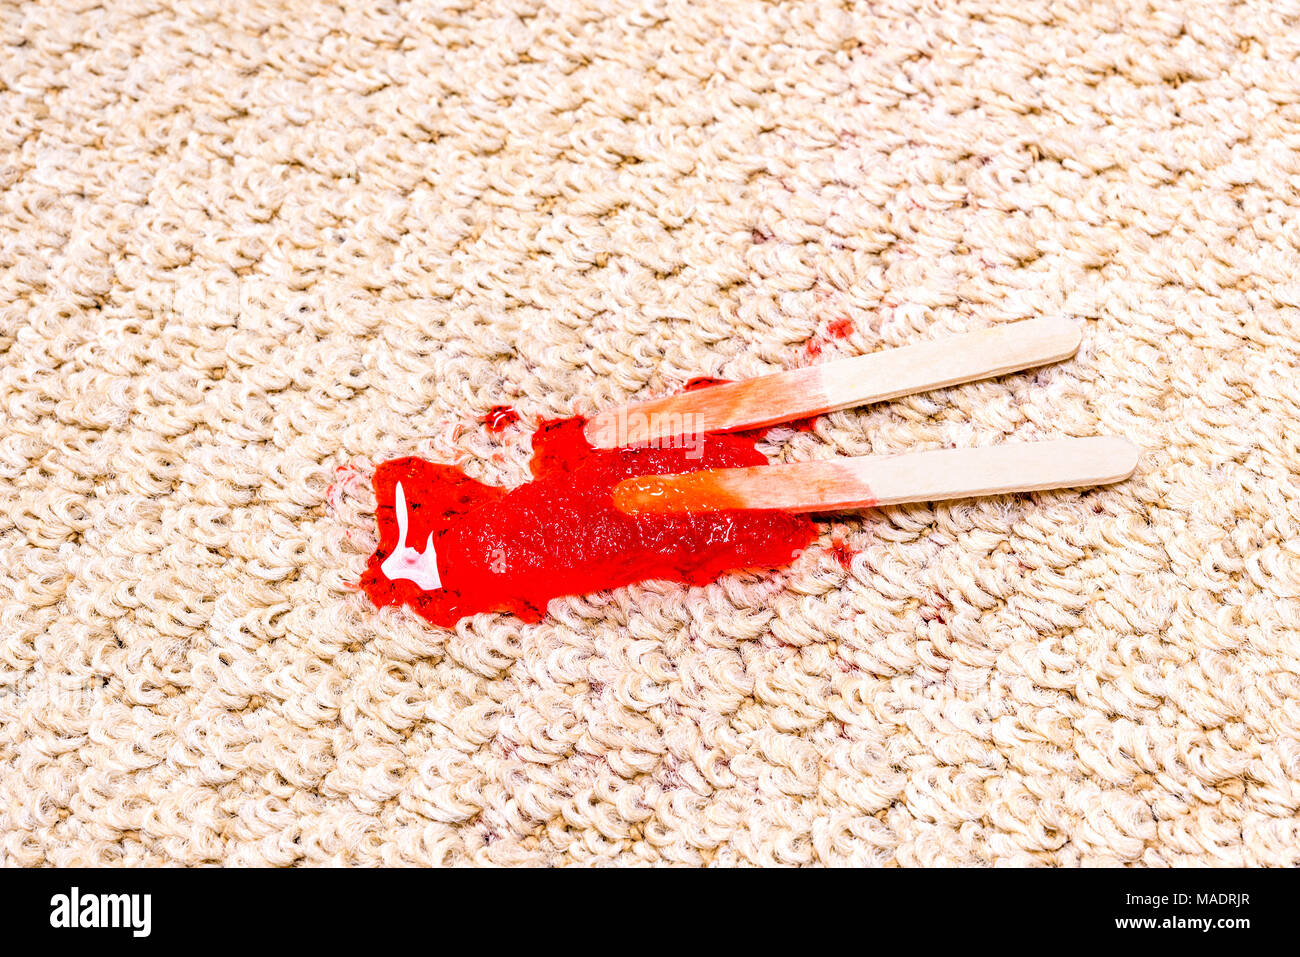 A time lapse of a melting popsicle on white carpet shows the icy treat melt into a sticky juice and absorb right into the carpet. Stock Photo